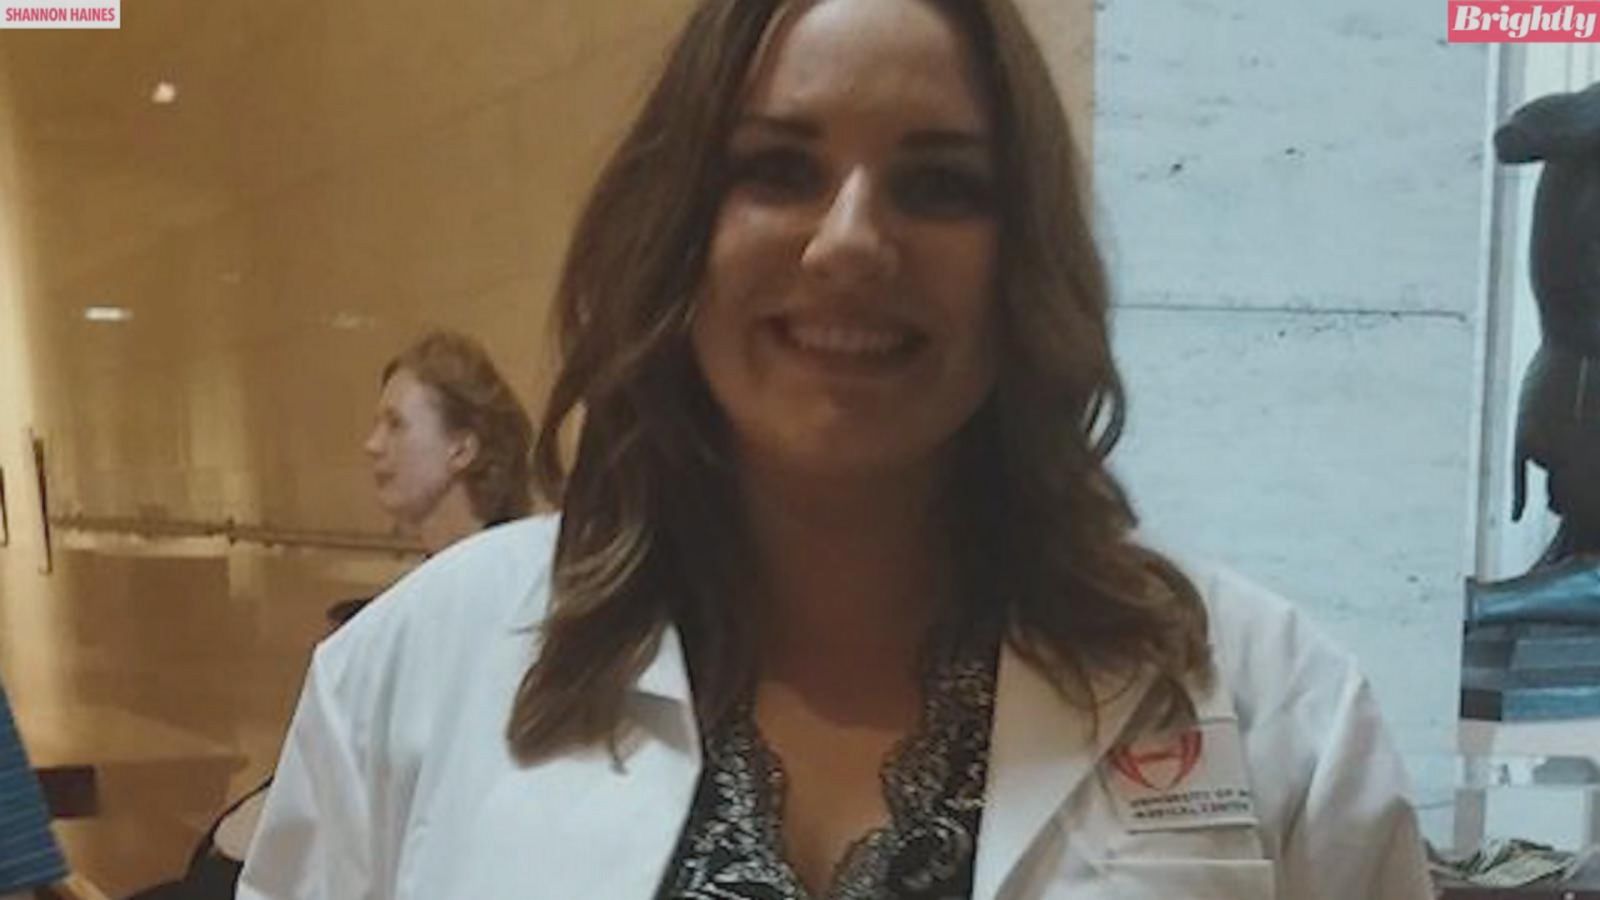 Shannon Haines, 29, will graduate from the University of Nebraska Medical Center on May 5.